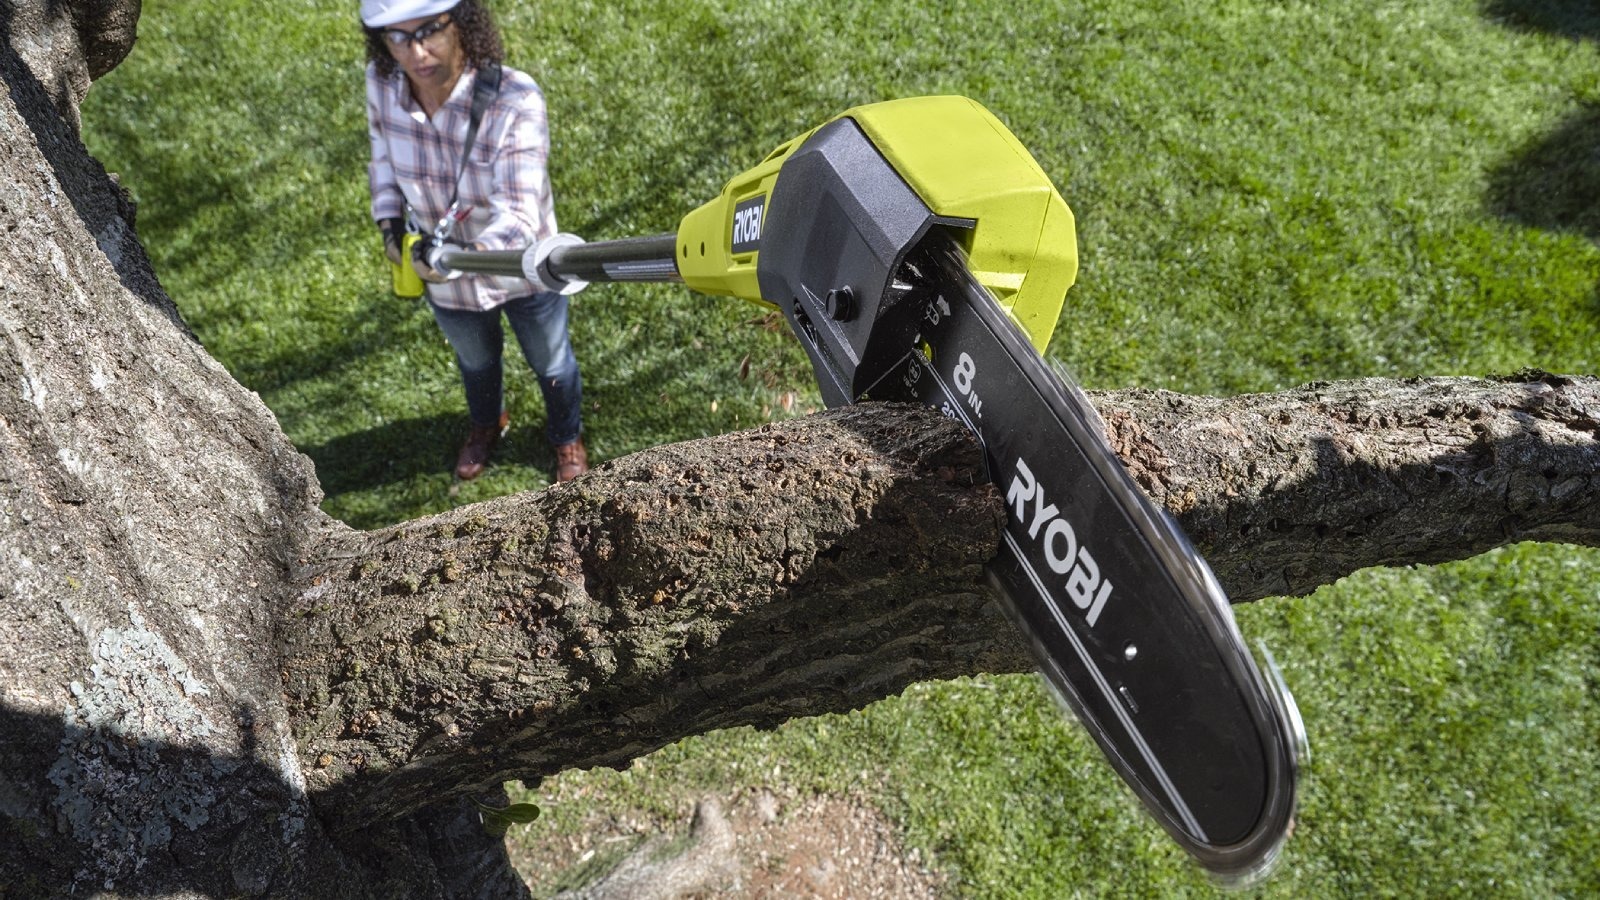 Ryobi 18v ONE+ Vs. Milwaukee M18 Fuel Pole Saw Tree Trimmer: What's The Difference?